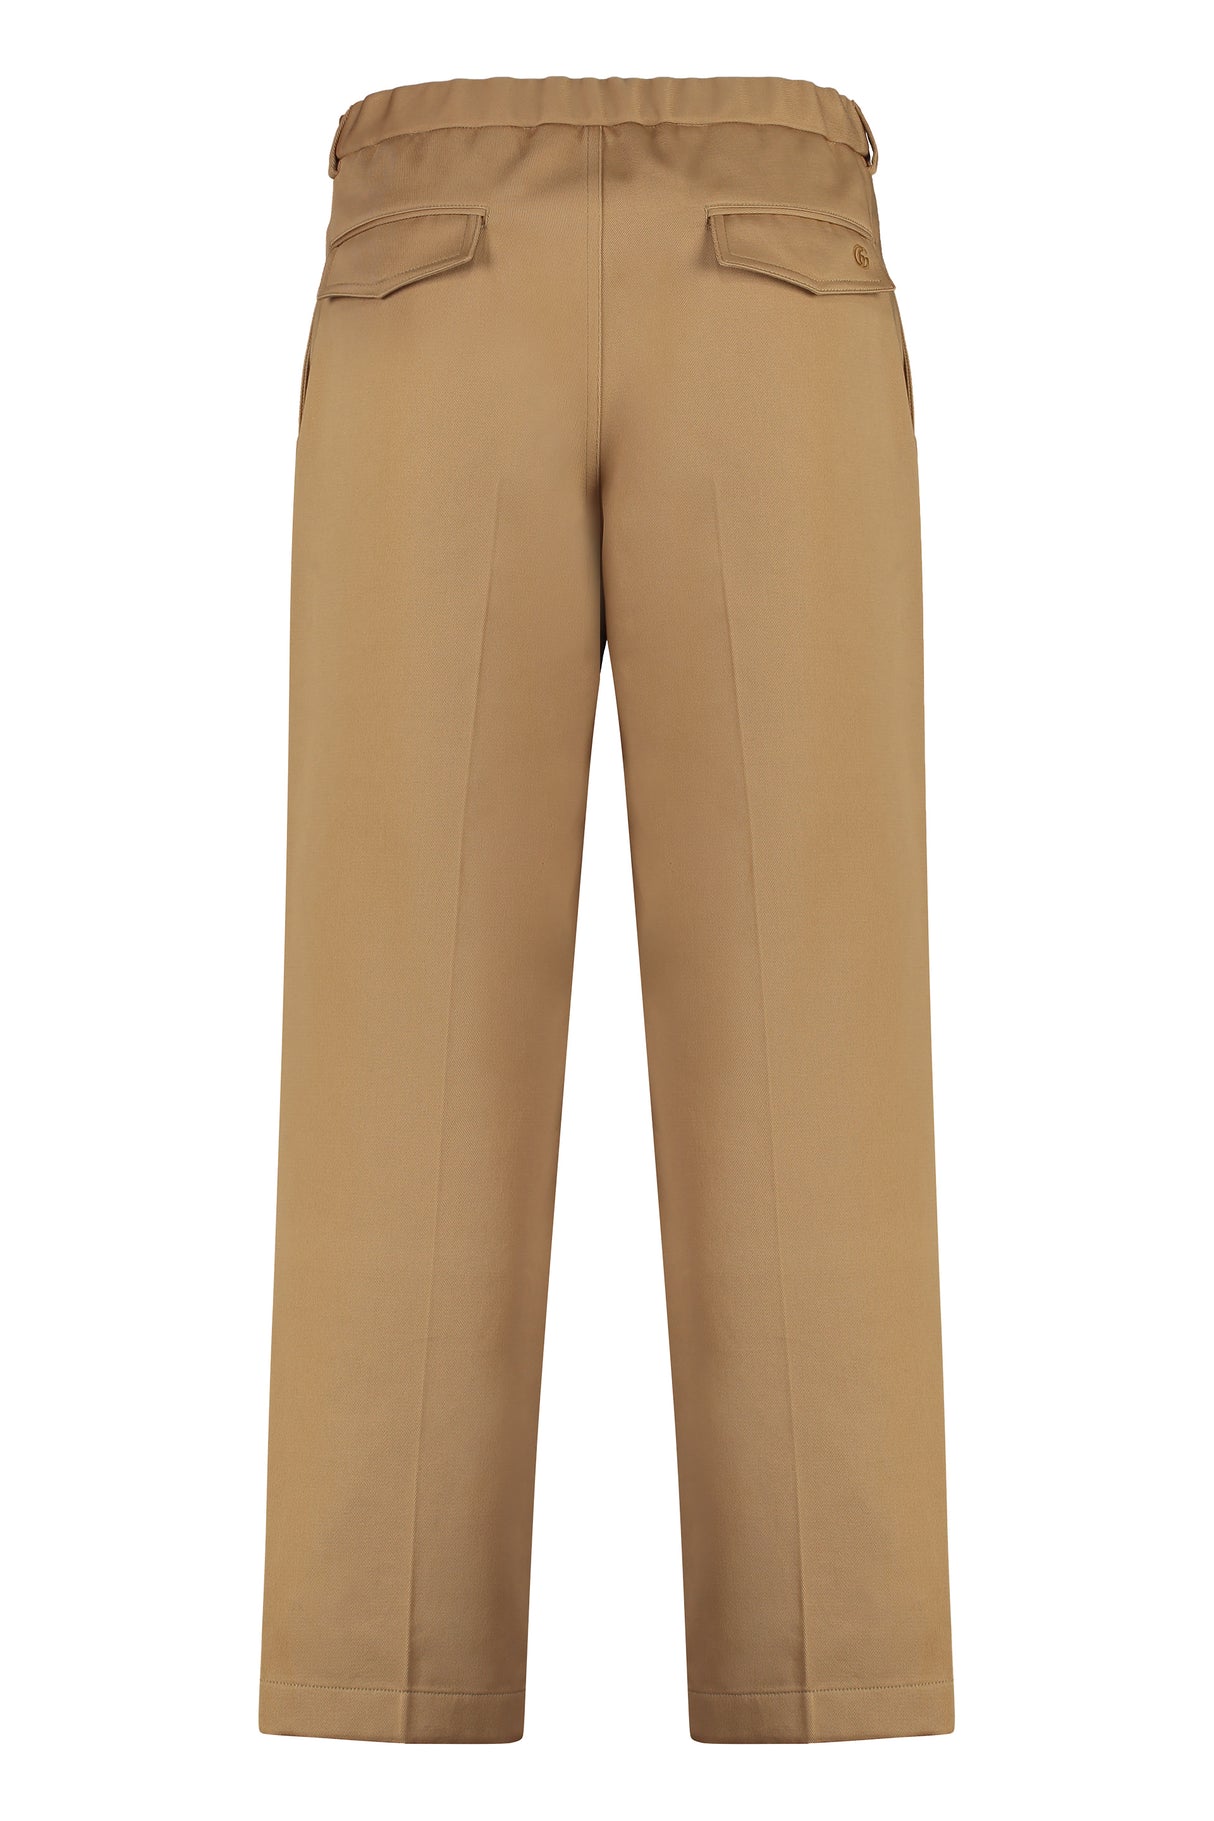 GUCCI Men's Tan Cotton Trousers for SS24